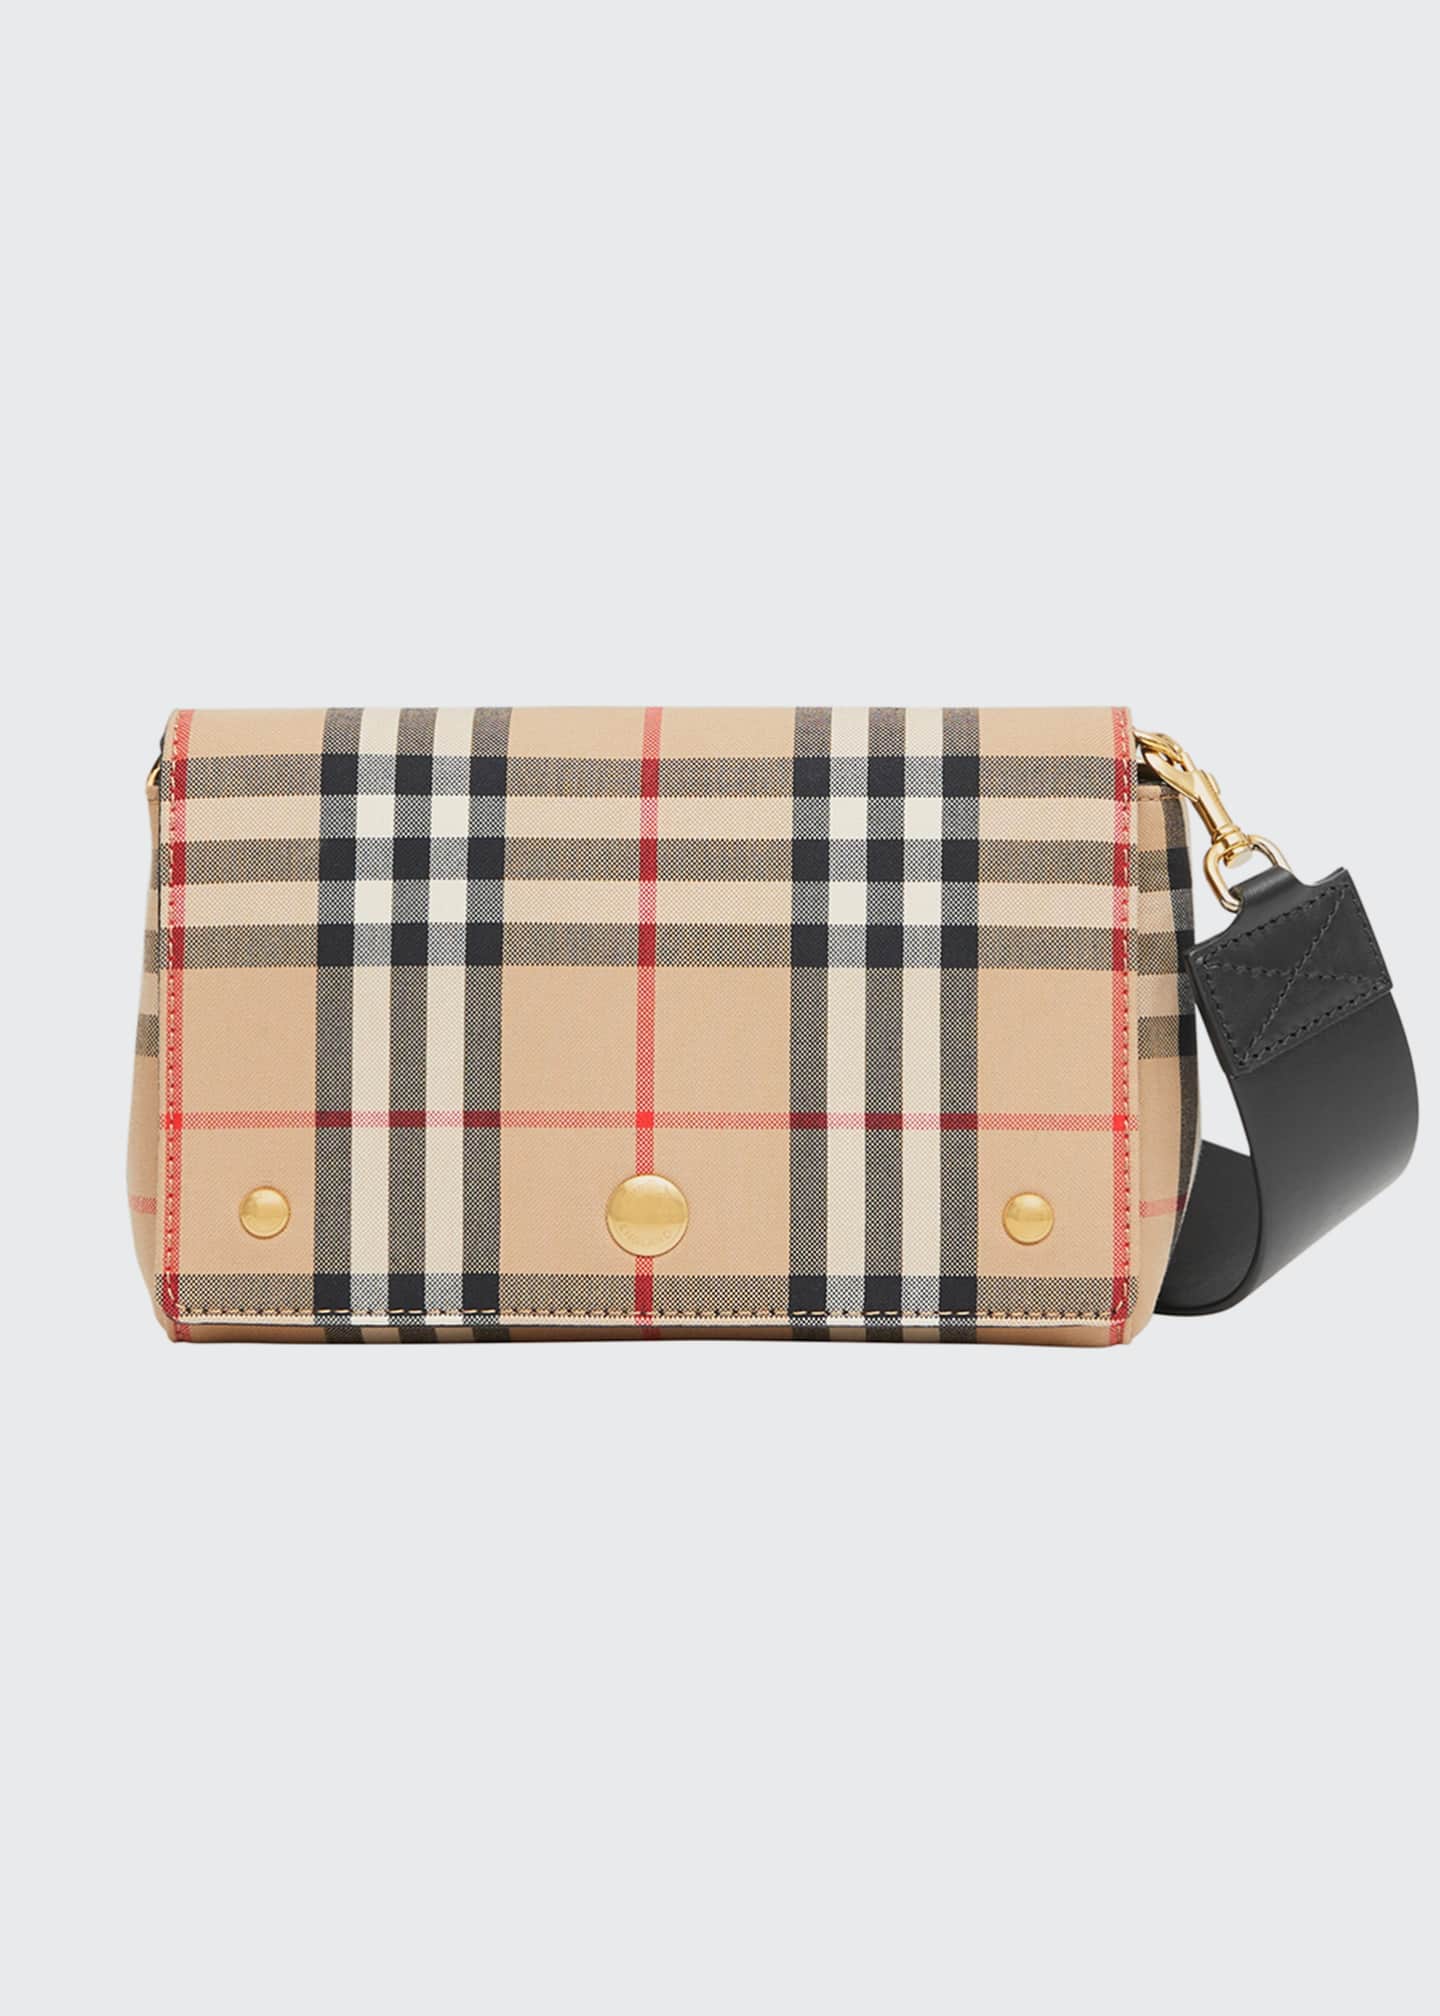 burberry mini leather and vintage check crossbody bag